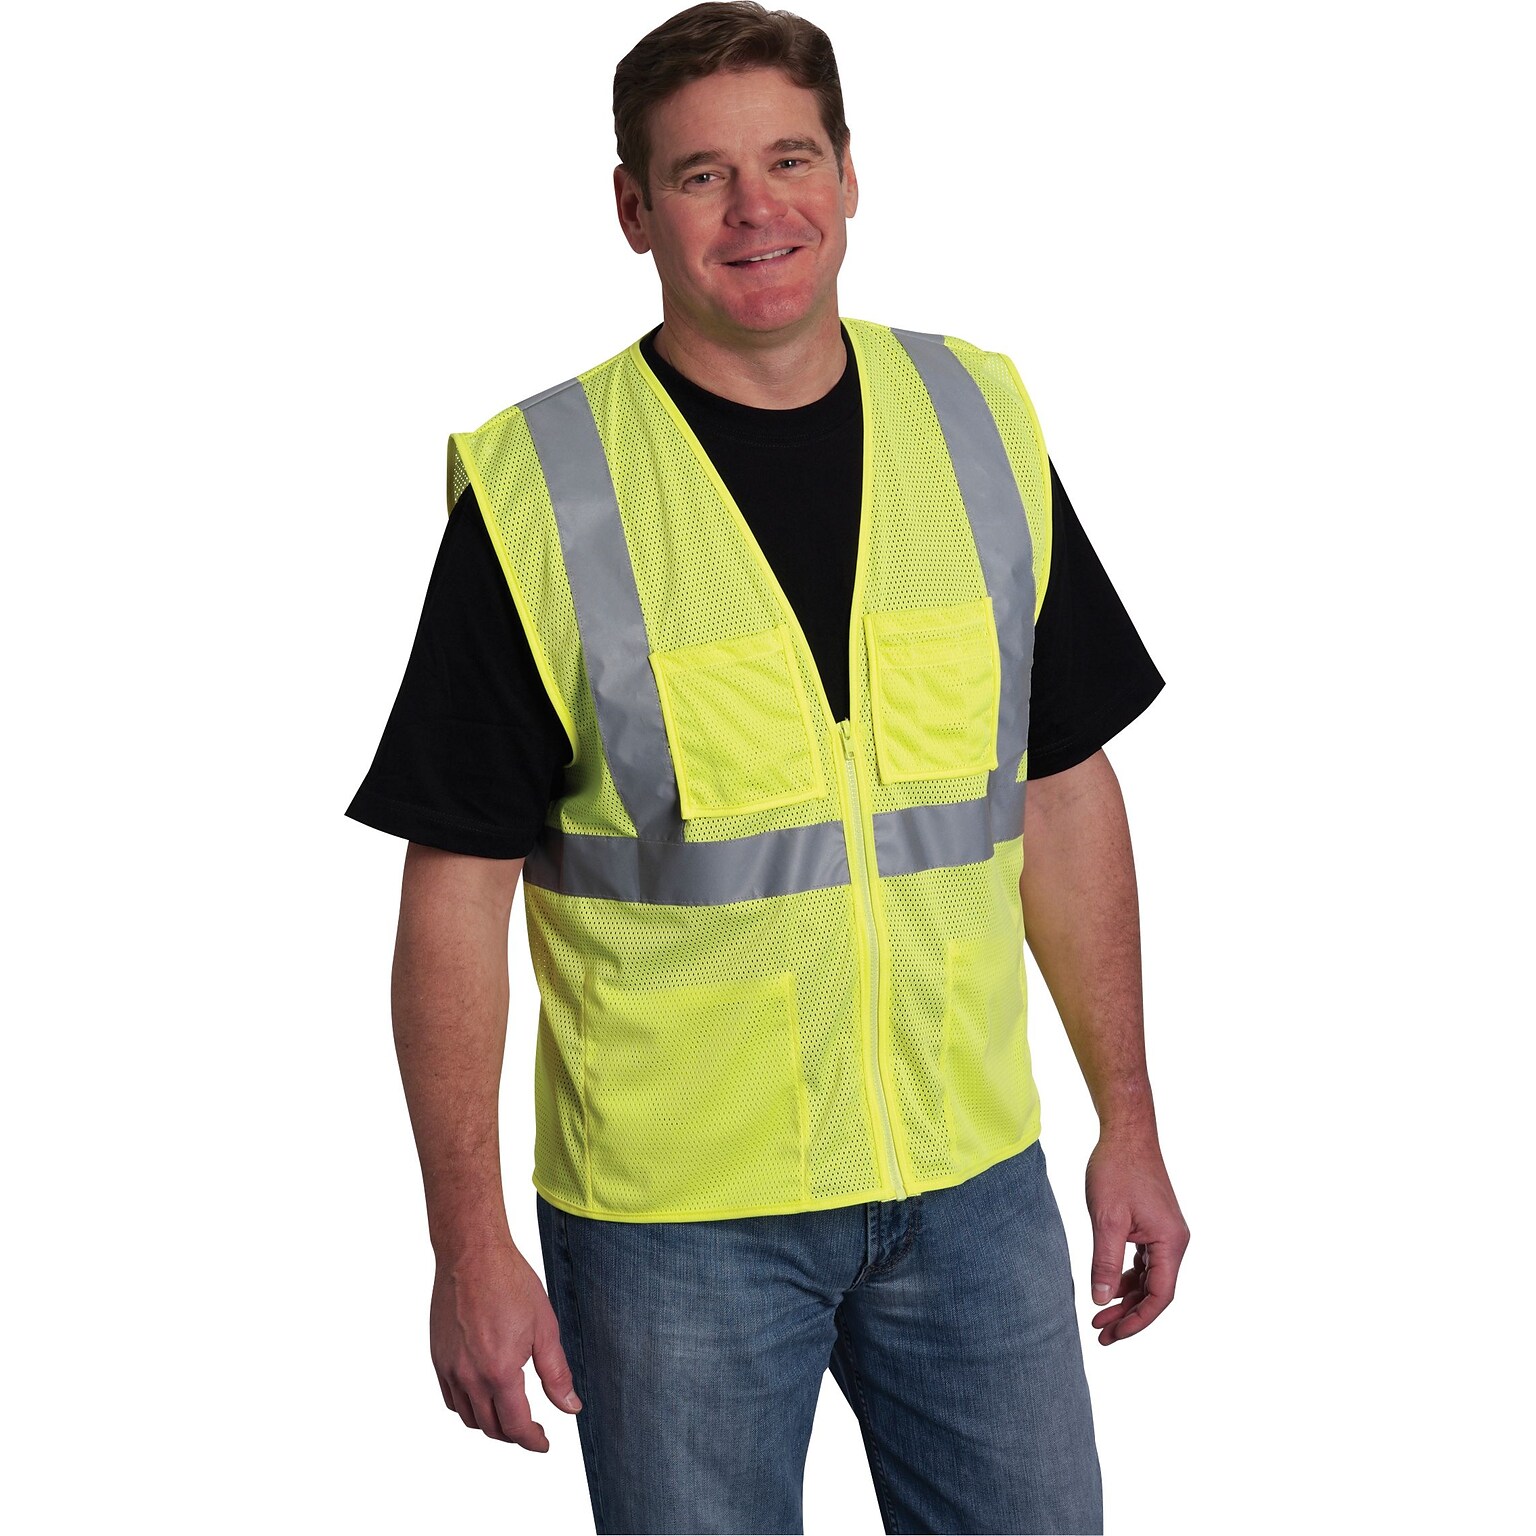 Protective Industrial Products High Visibility Sleeveless Safety Vests, ANSI Class 2, Yellow Mesh, Large (302-MVGZ4PLY-L)